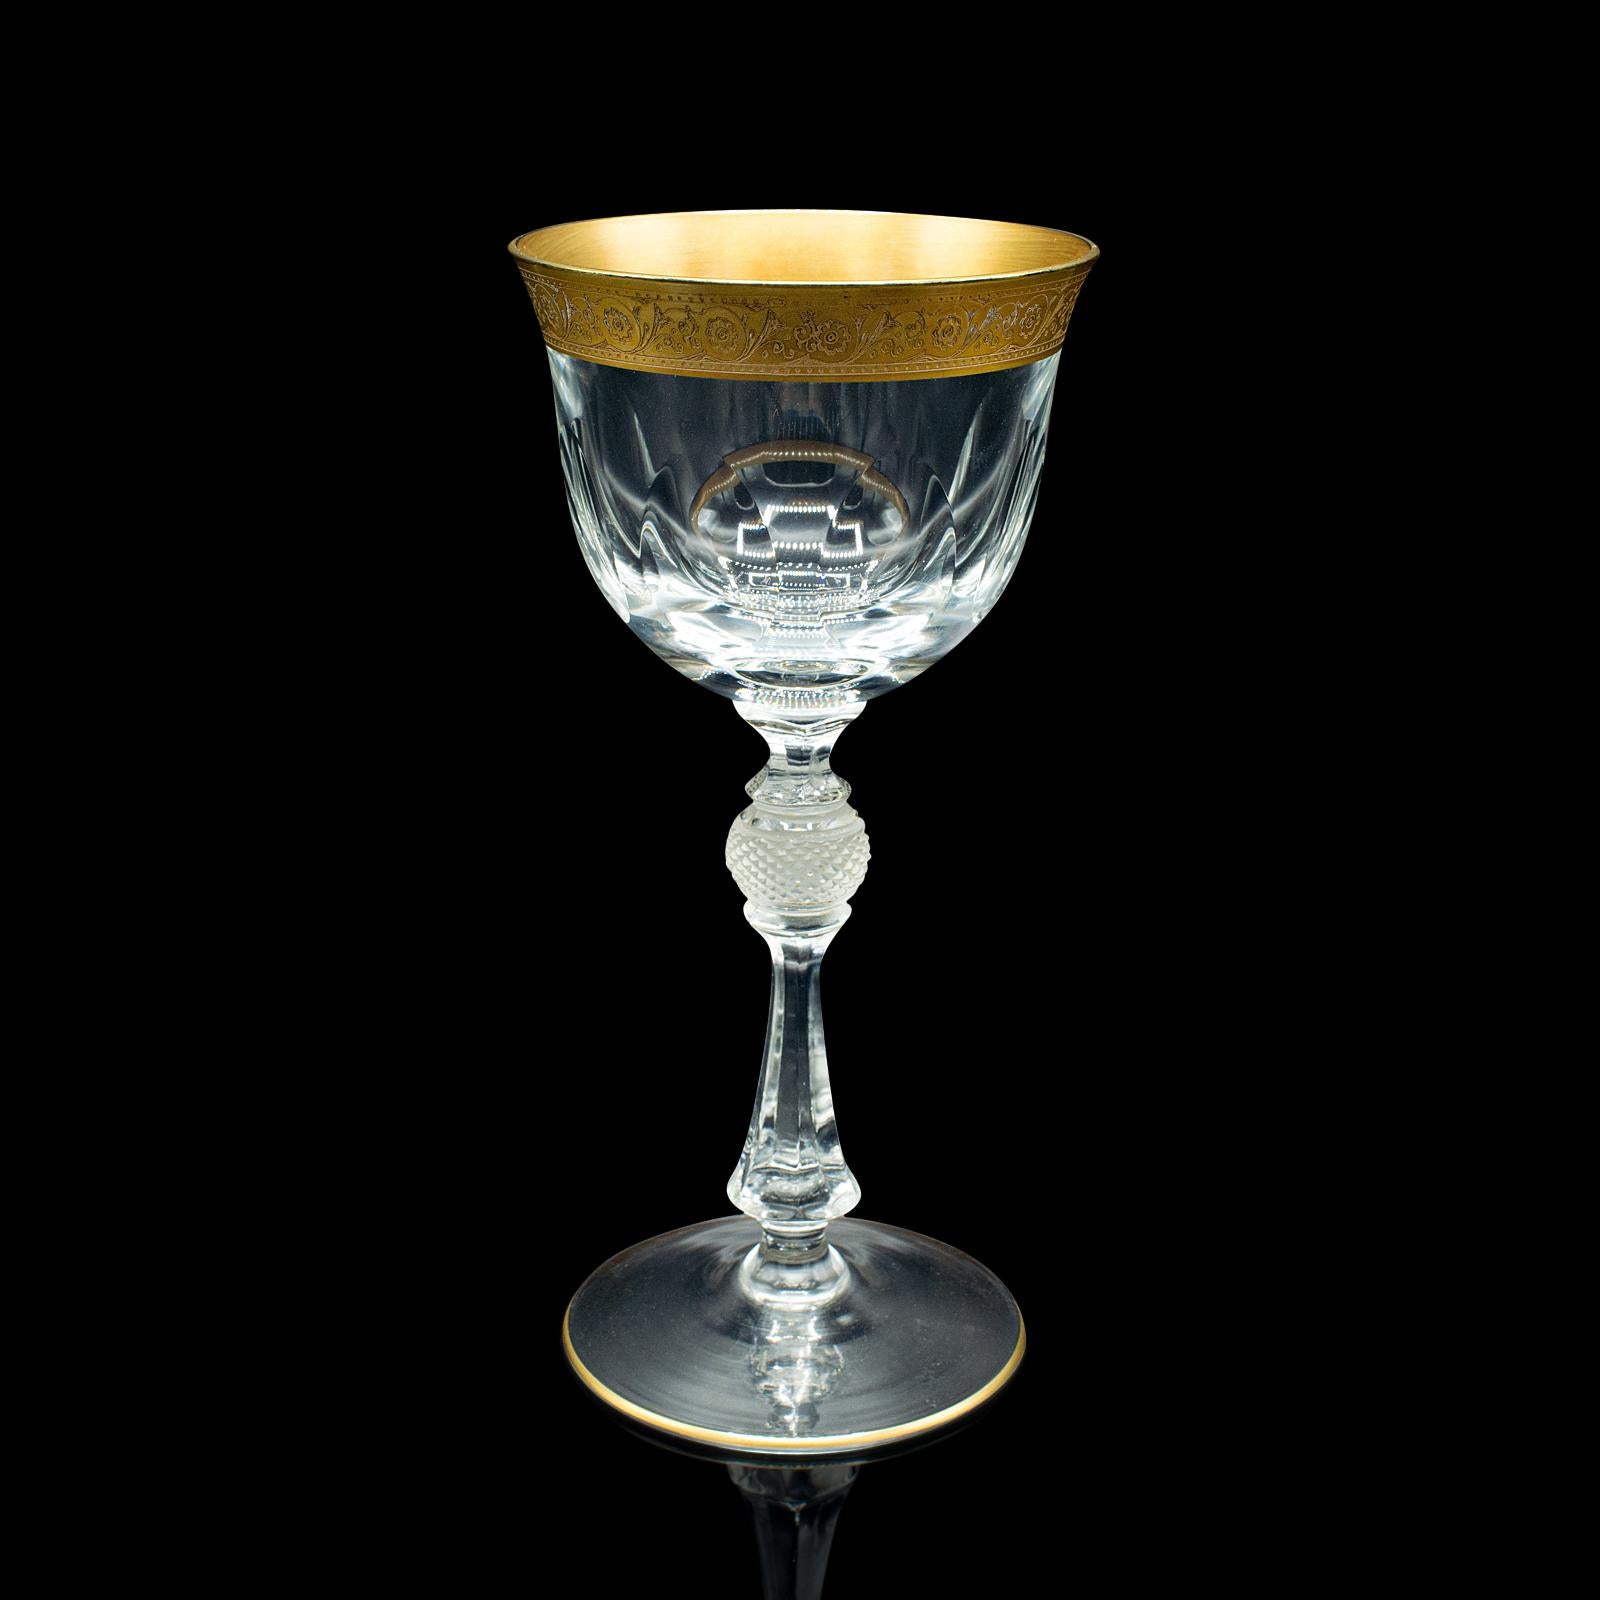 Pair of Antique Celebratory Port Glasses, French, Gilt, Stem Glass, Art Deco In Good Condition For Sale In Hele, Devon, GB